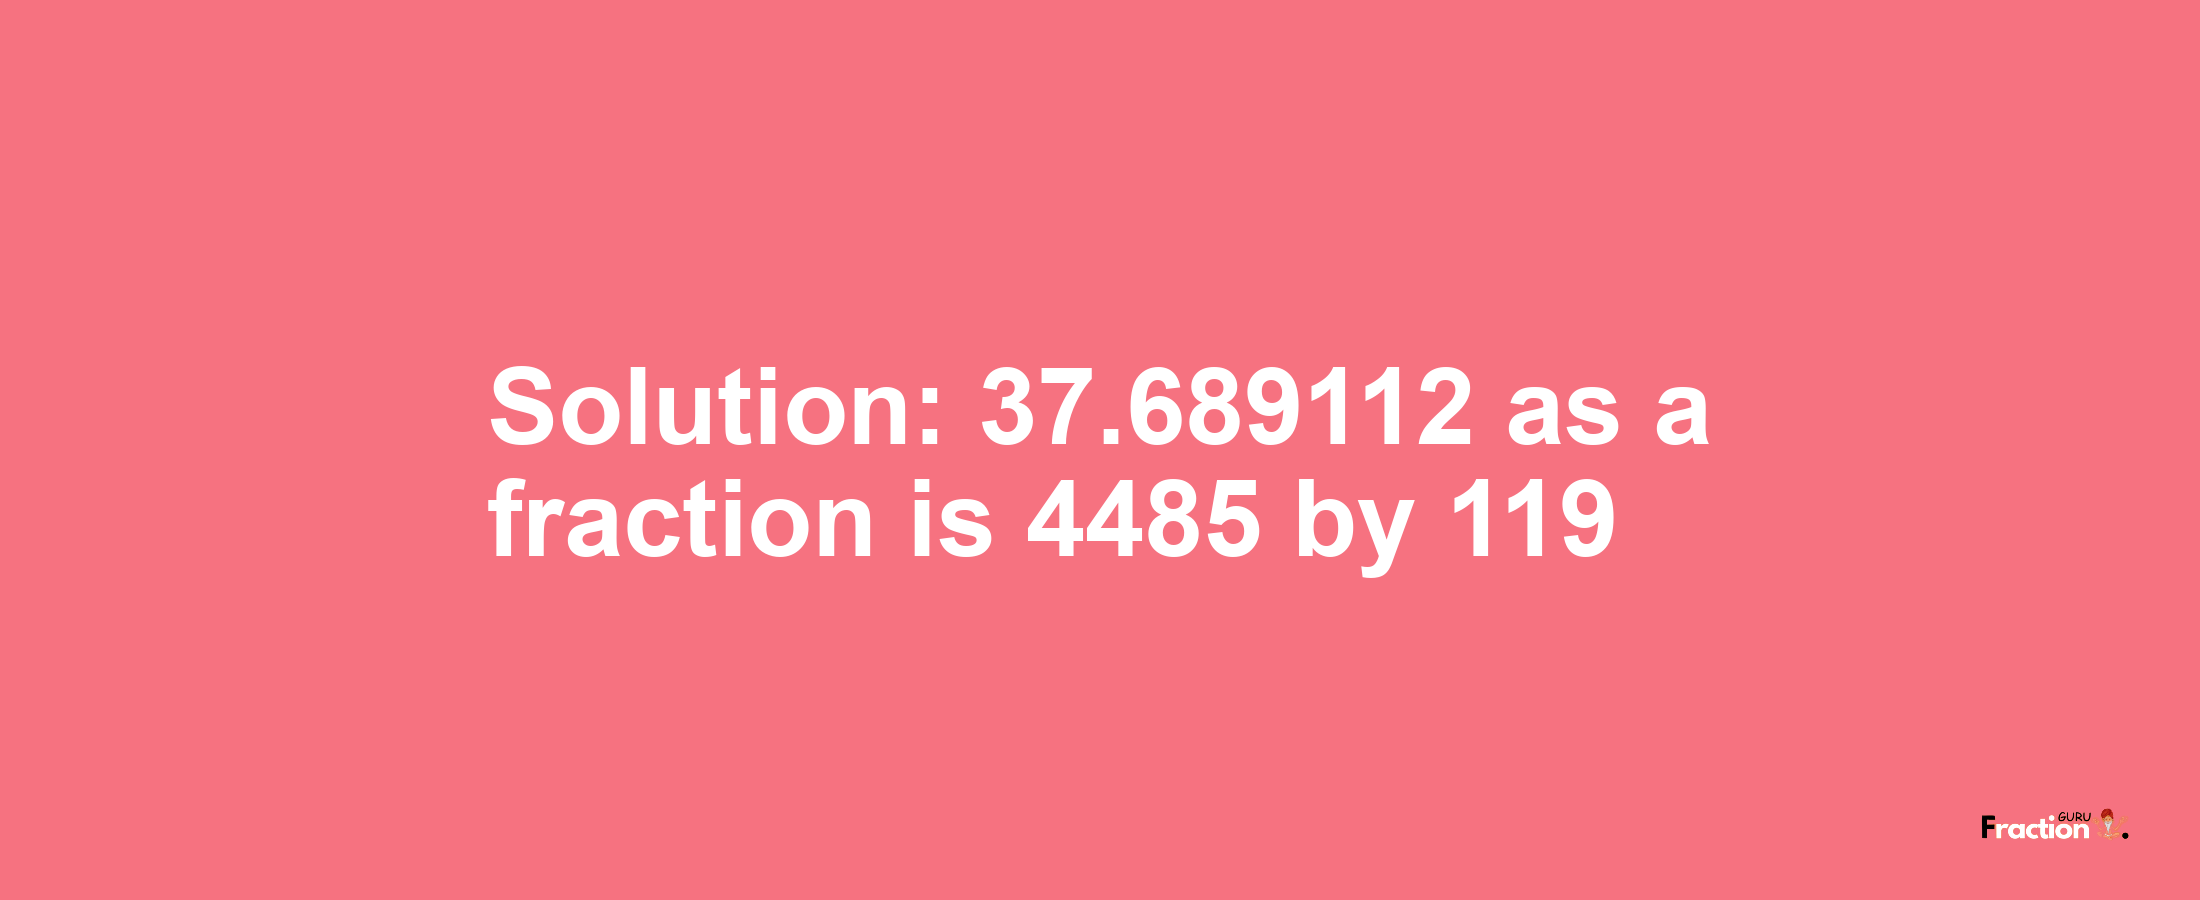 Solution:37.689112 as a fraction is 4485/119